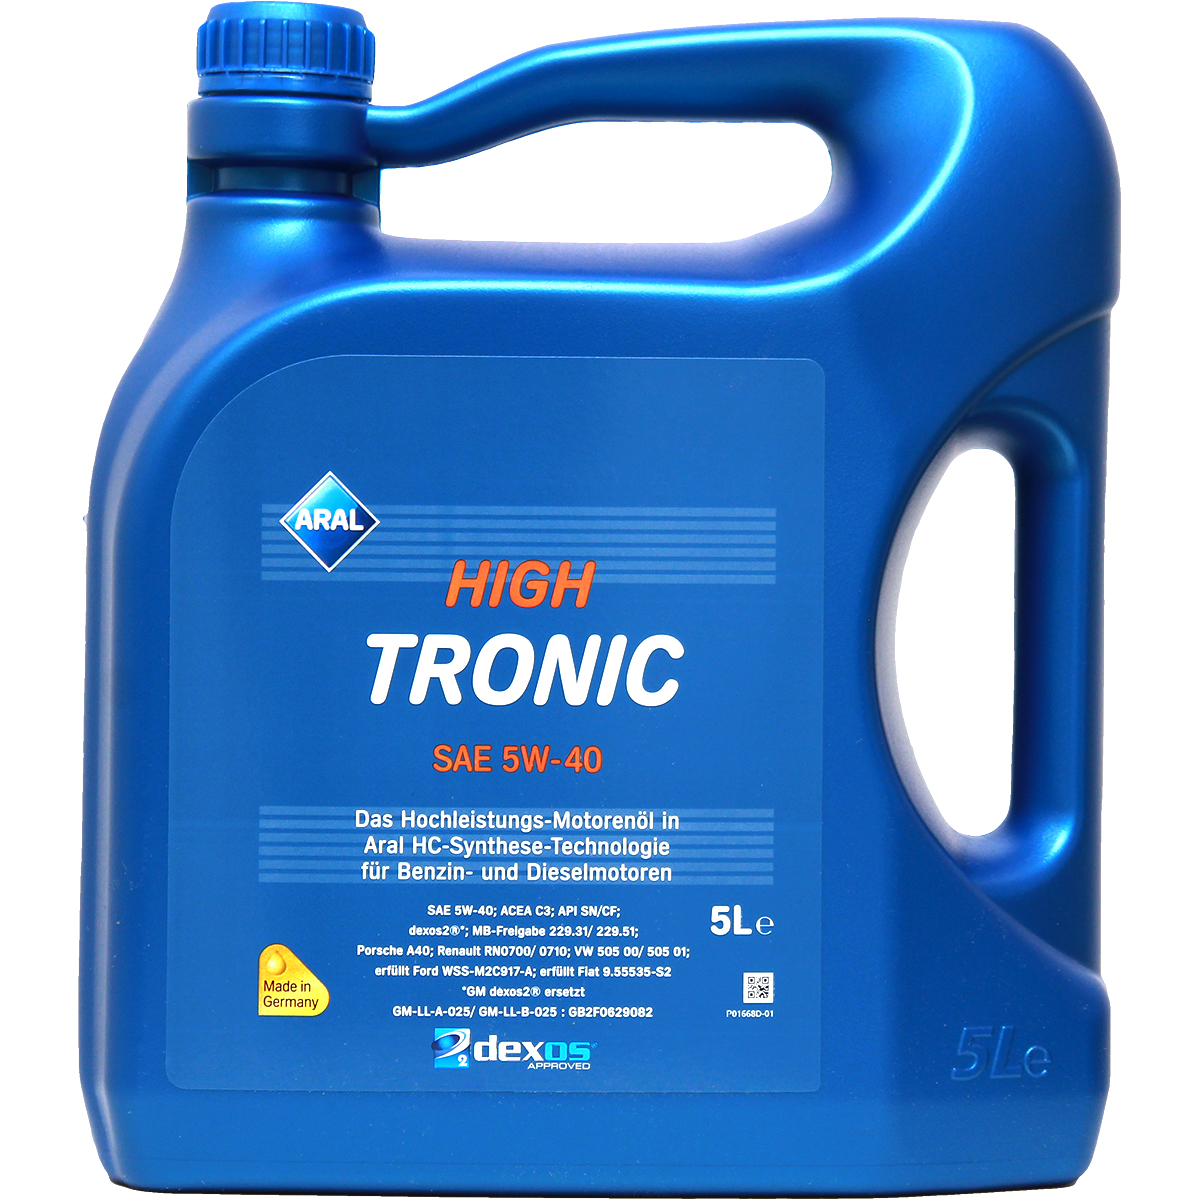 Aral HighTronic 5W-40 5+4 Liter